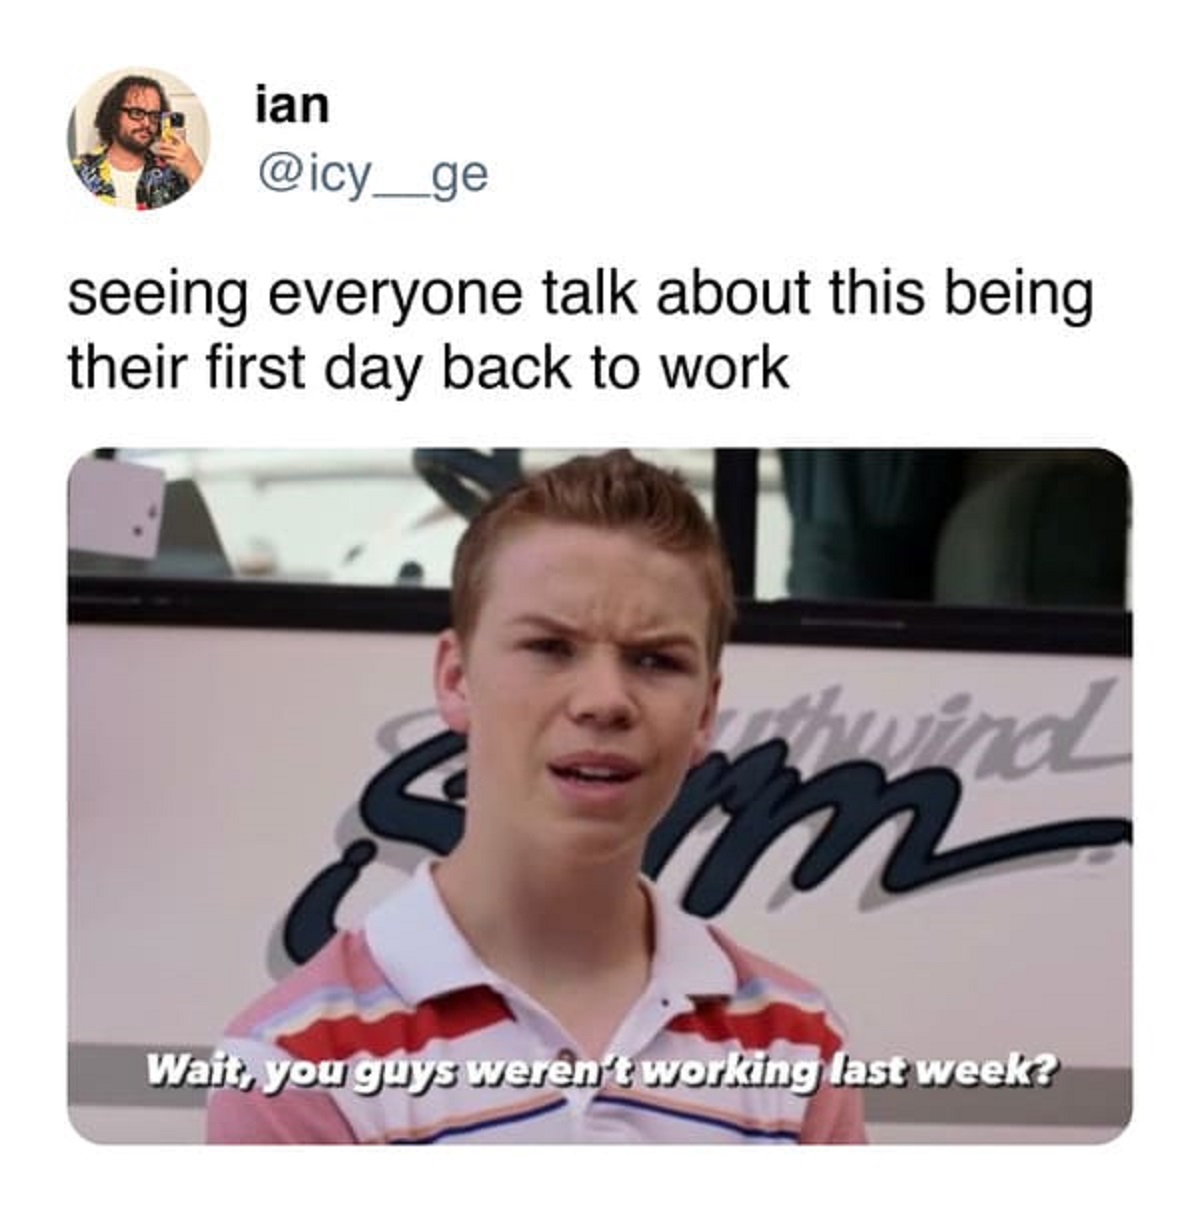 photo caption - ian seeing everyone talk about this being their first day back to work thwind m Wait, you guys weren't working last week?